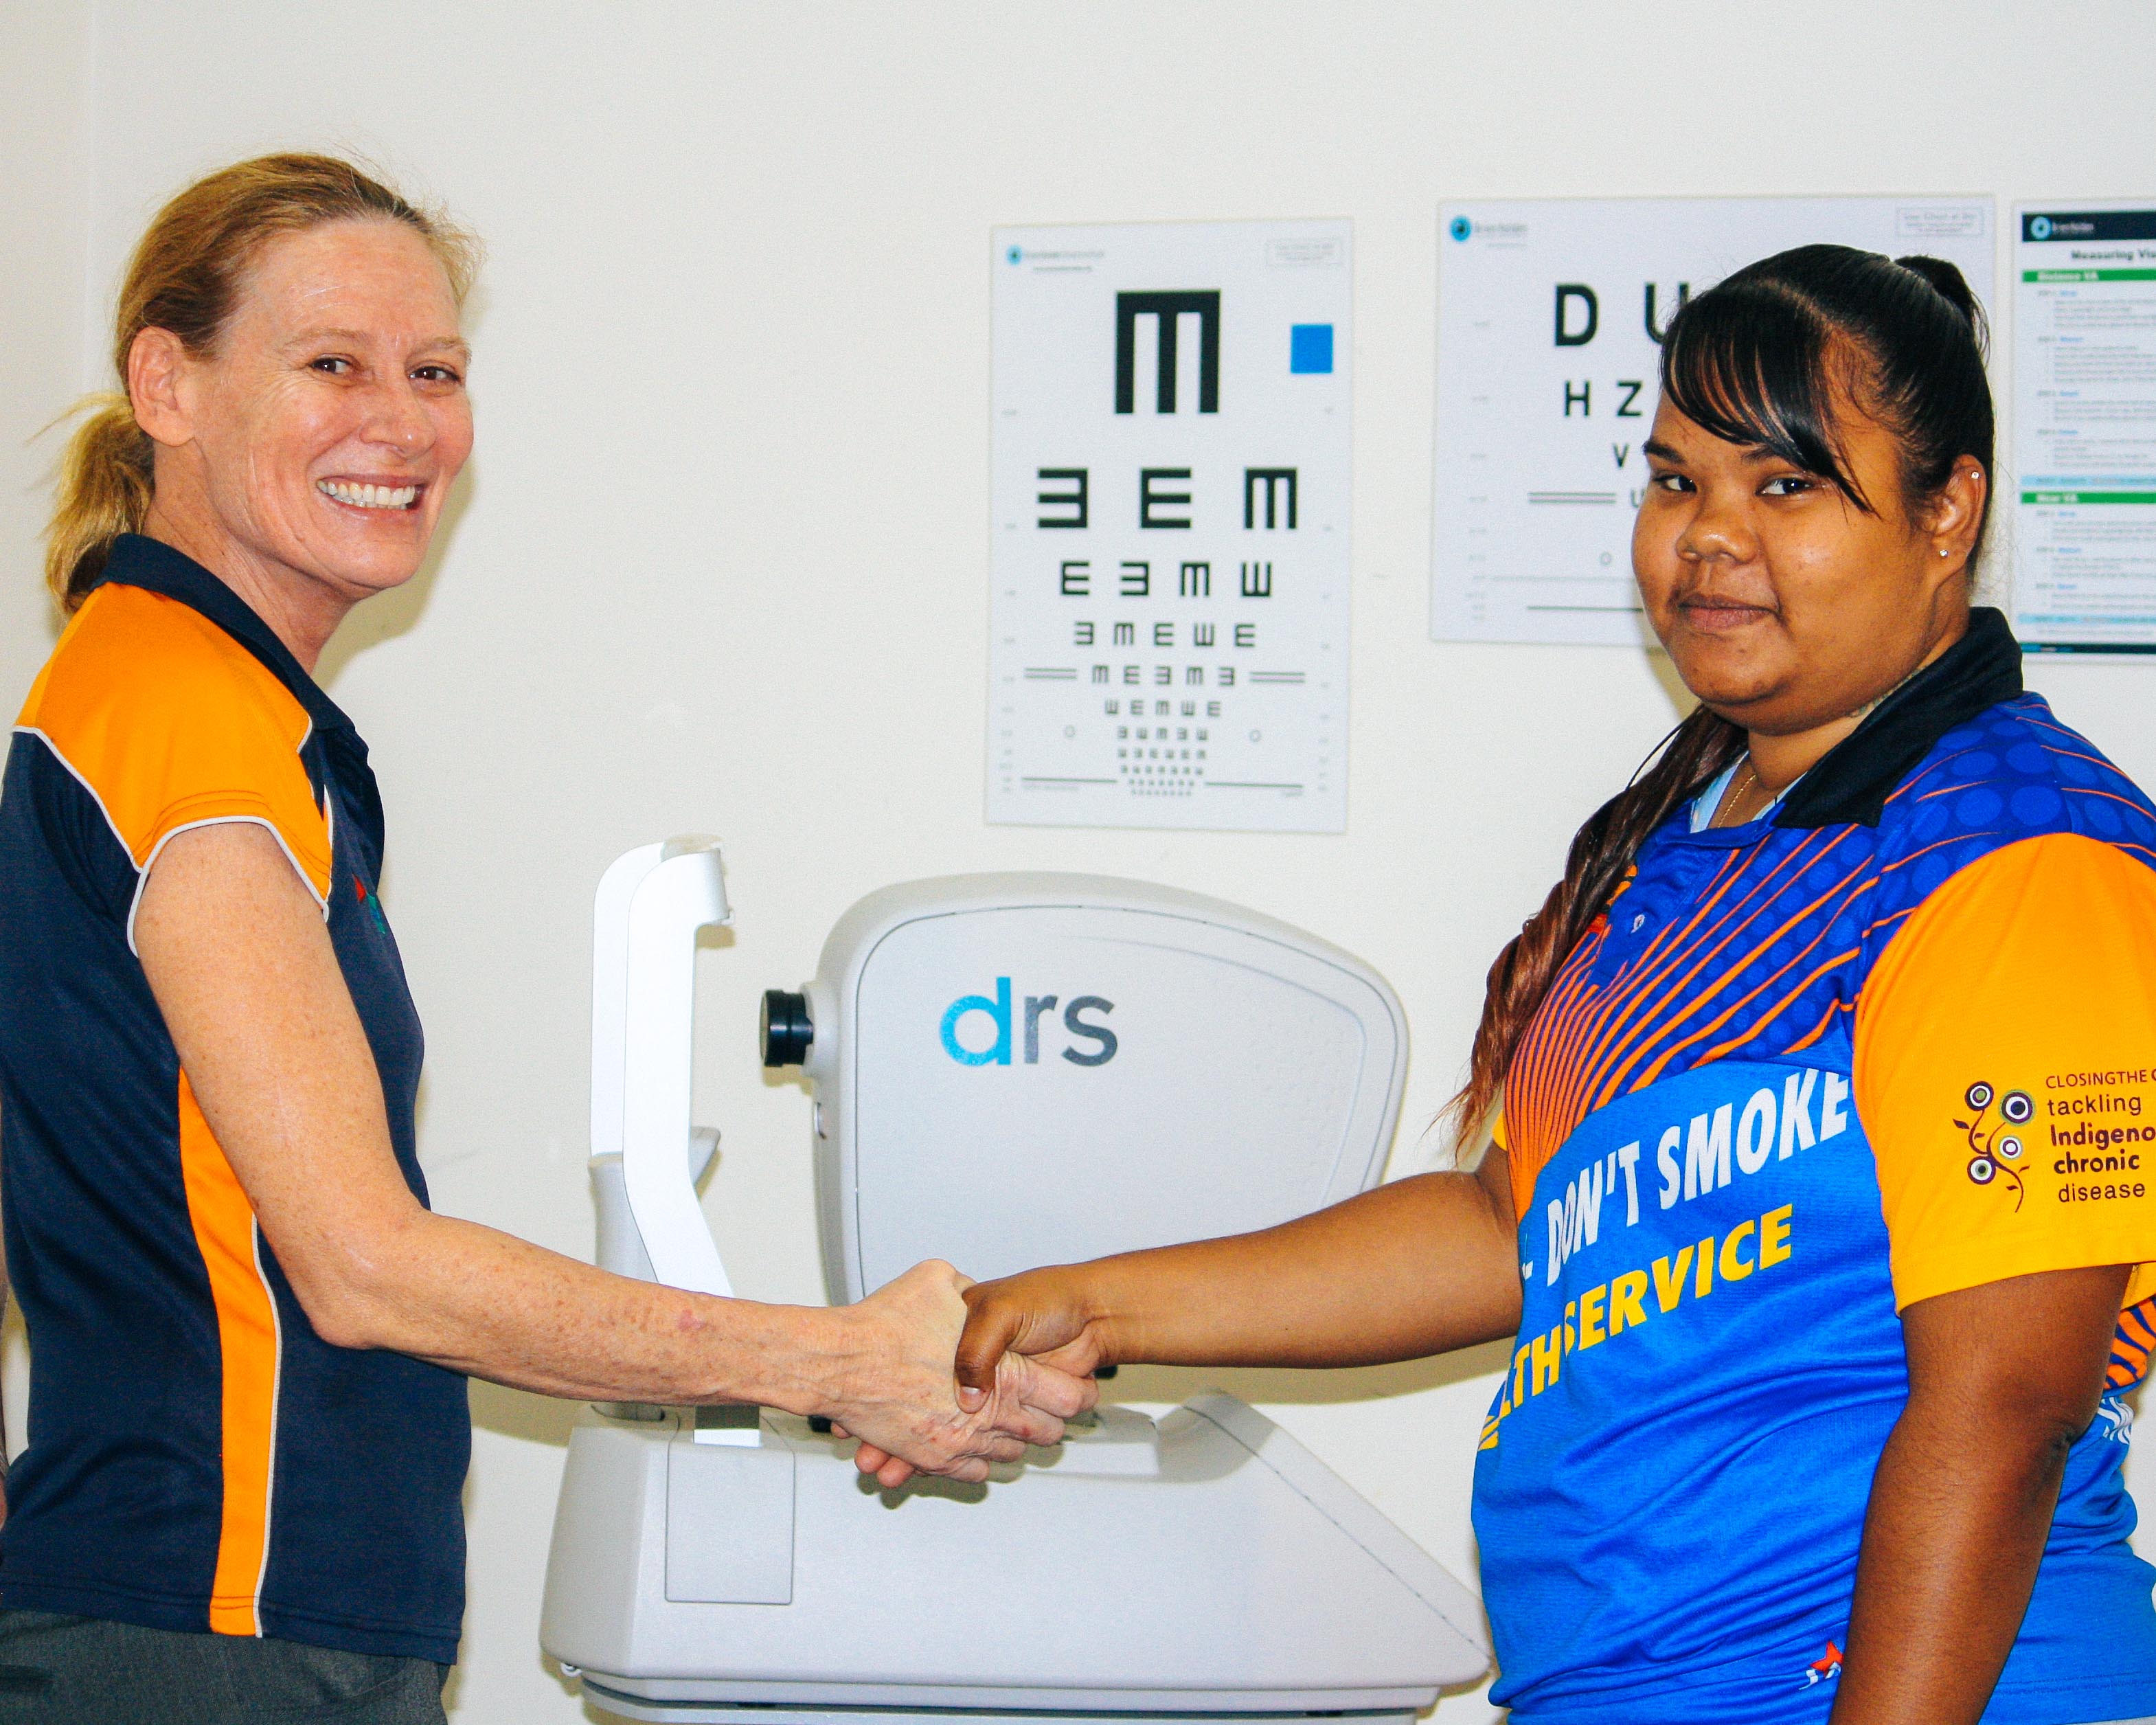 Tania and Karliy shaking hands in front of a retinal camera